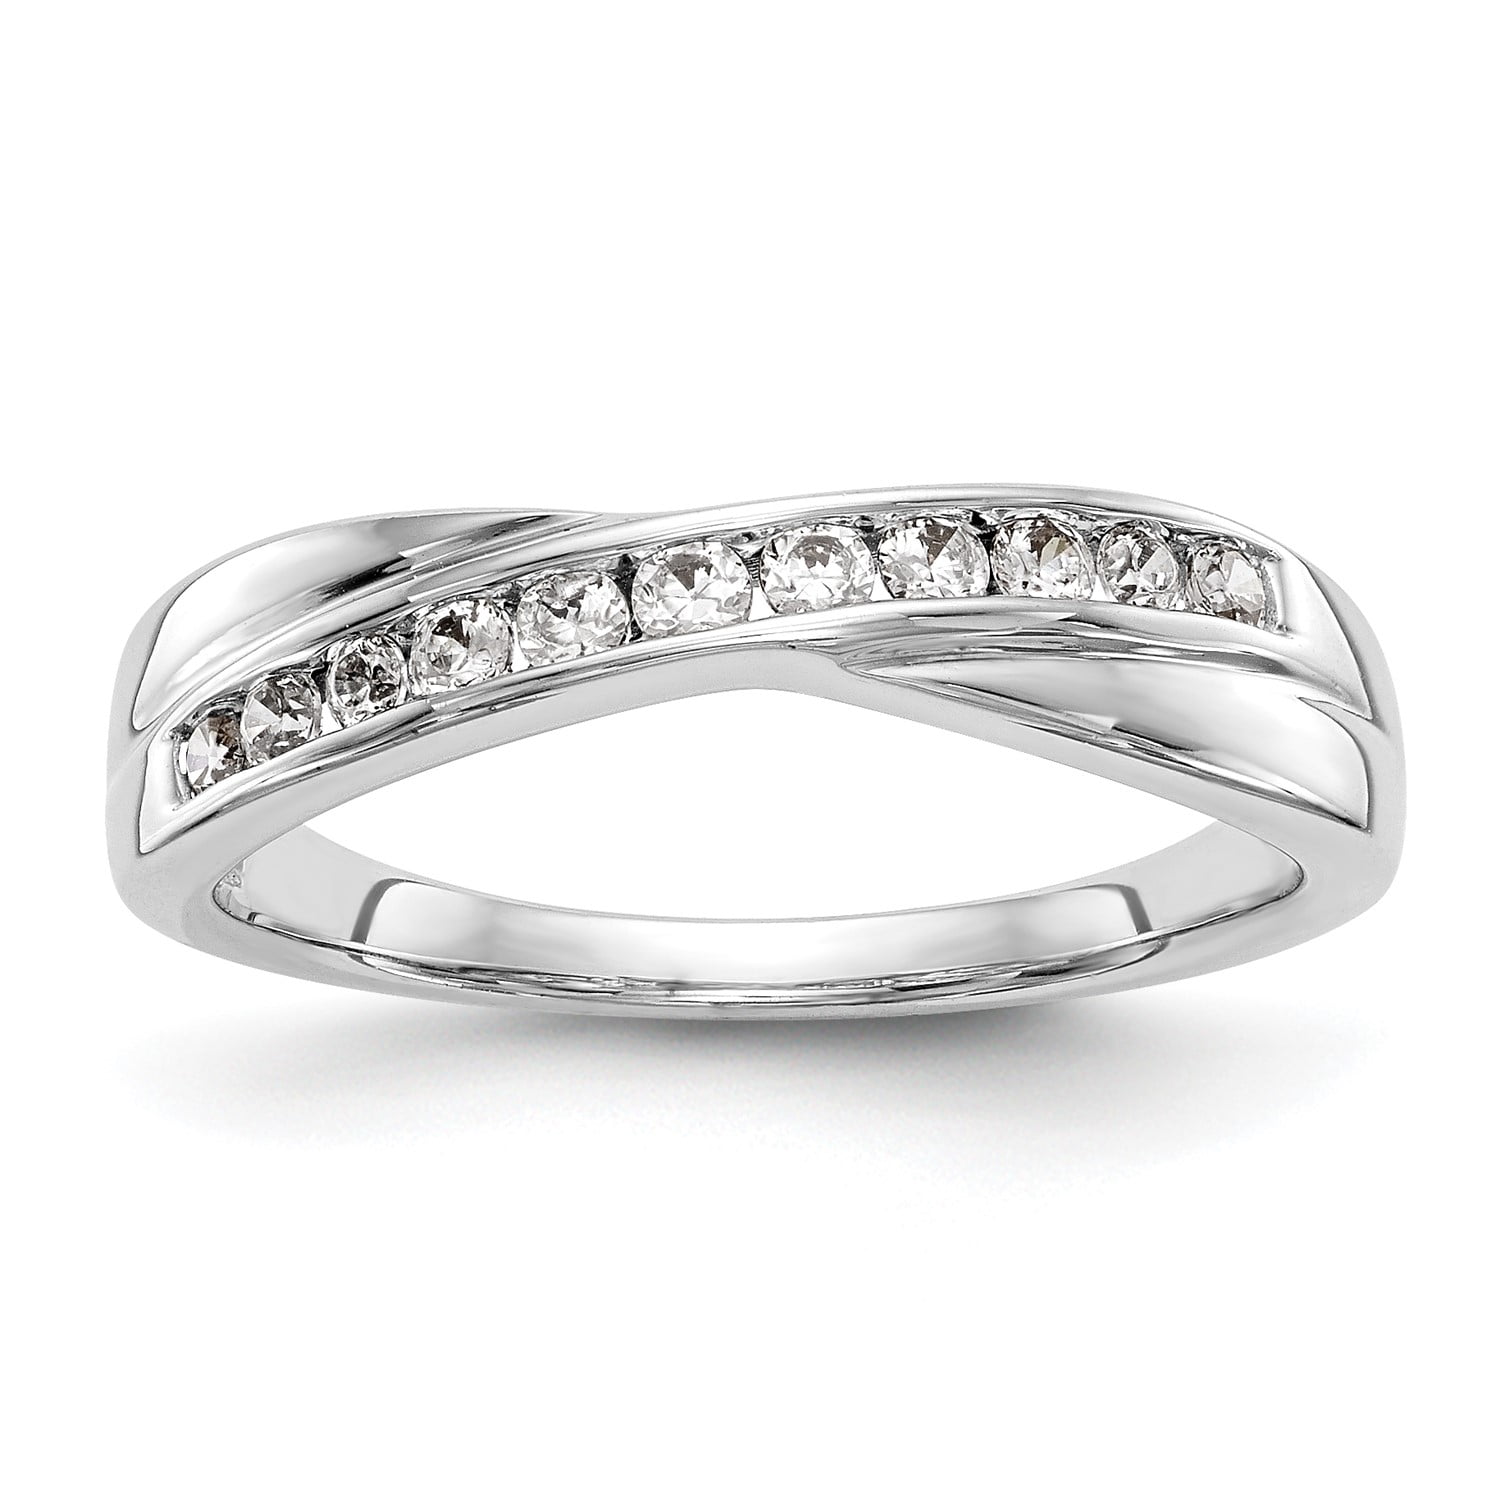 14K White Gold Diamond Anniversary Wedding Band Stackable Ring 1/5 CT Size 8 